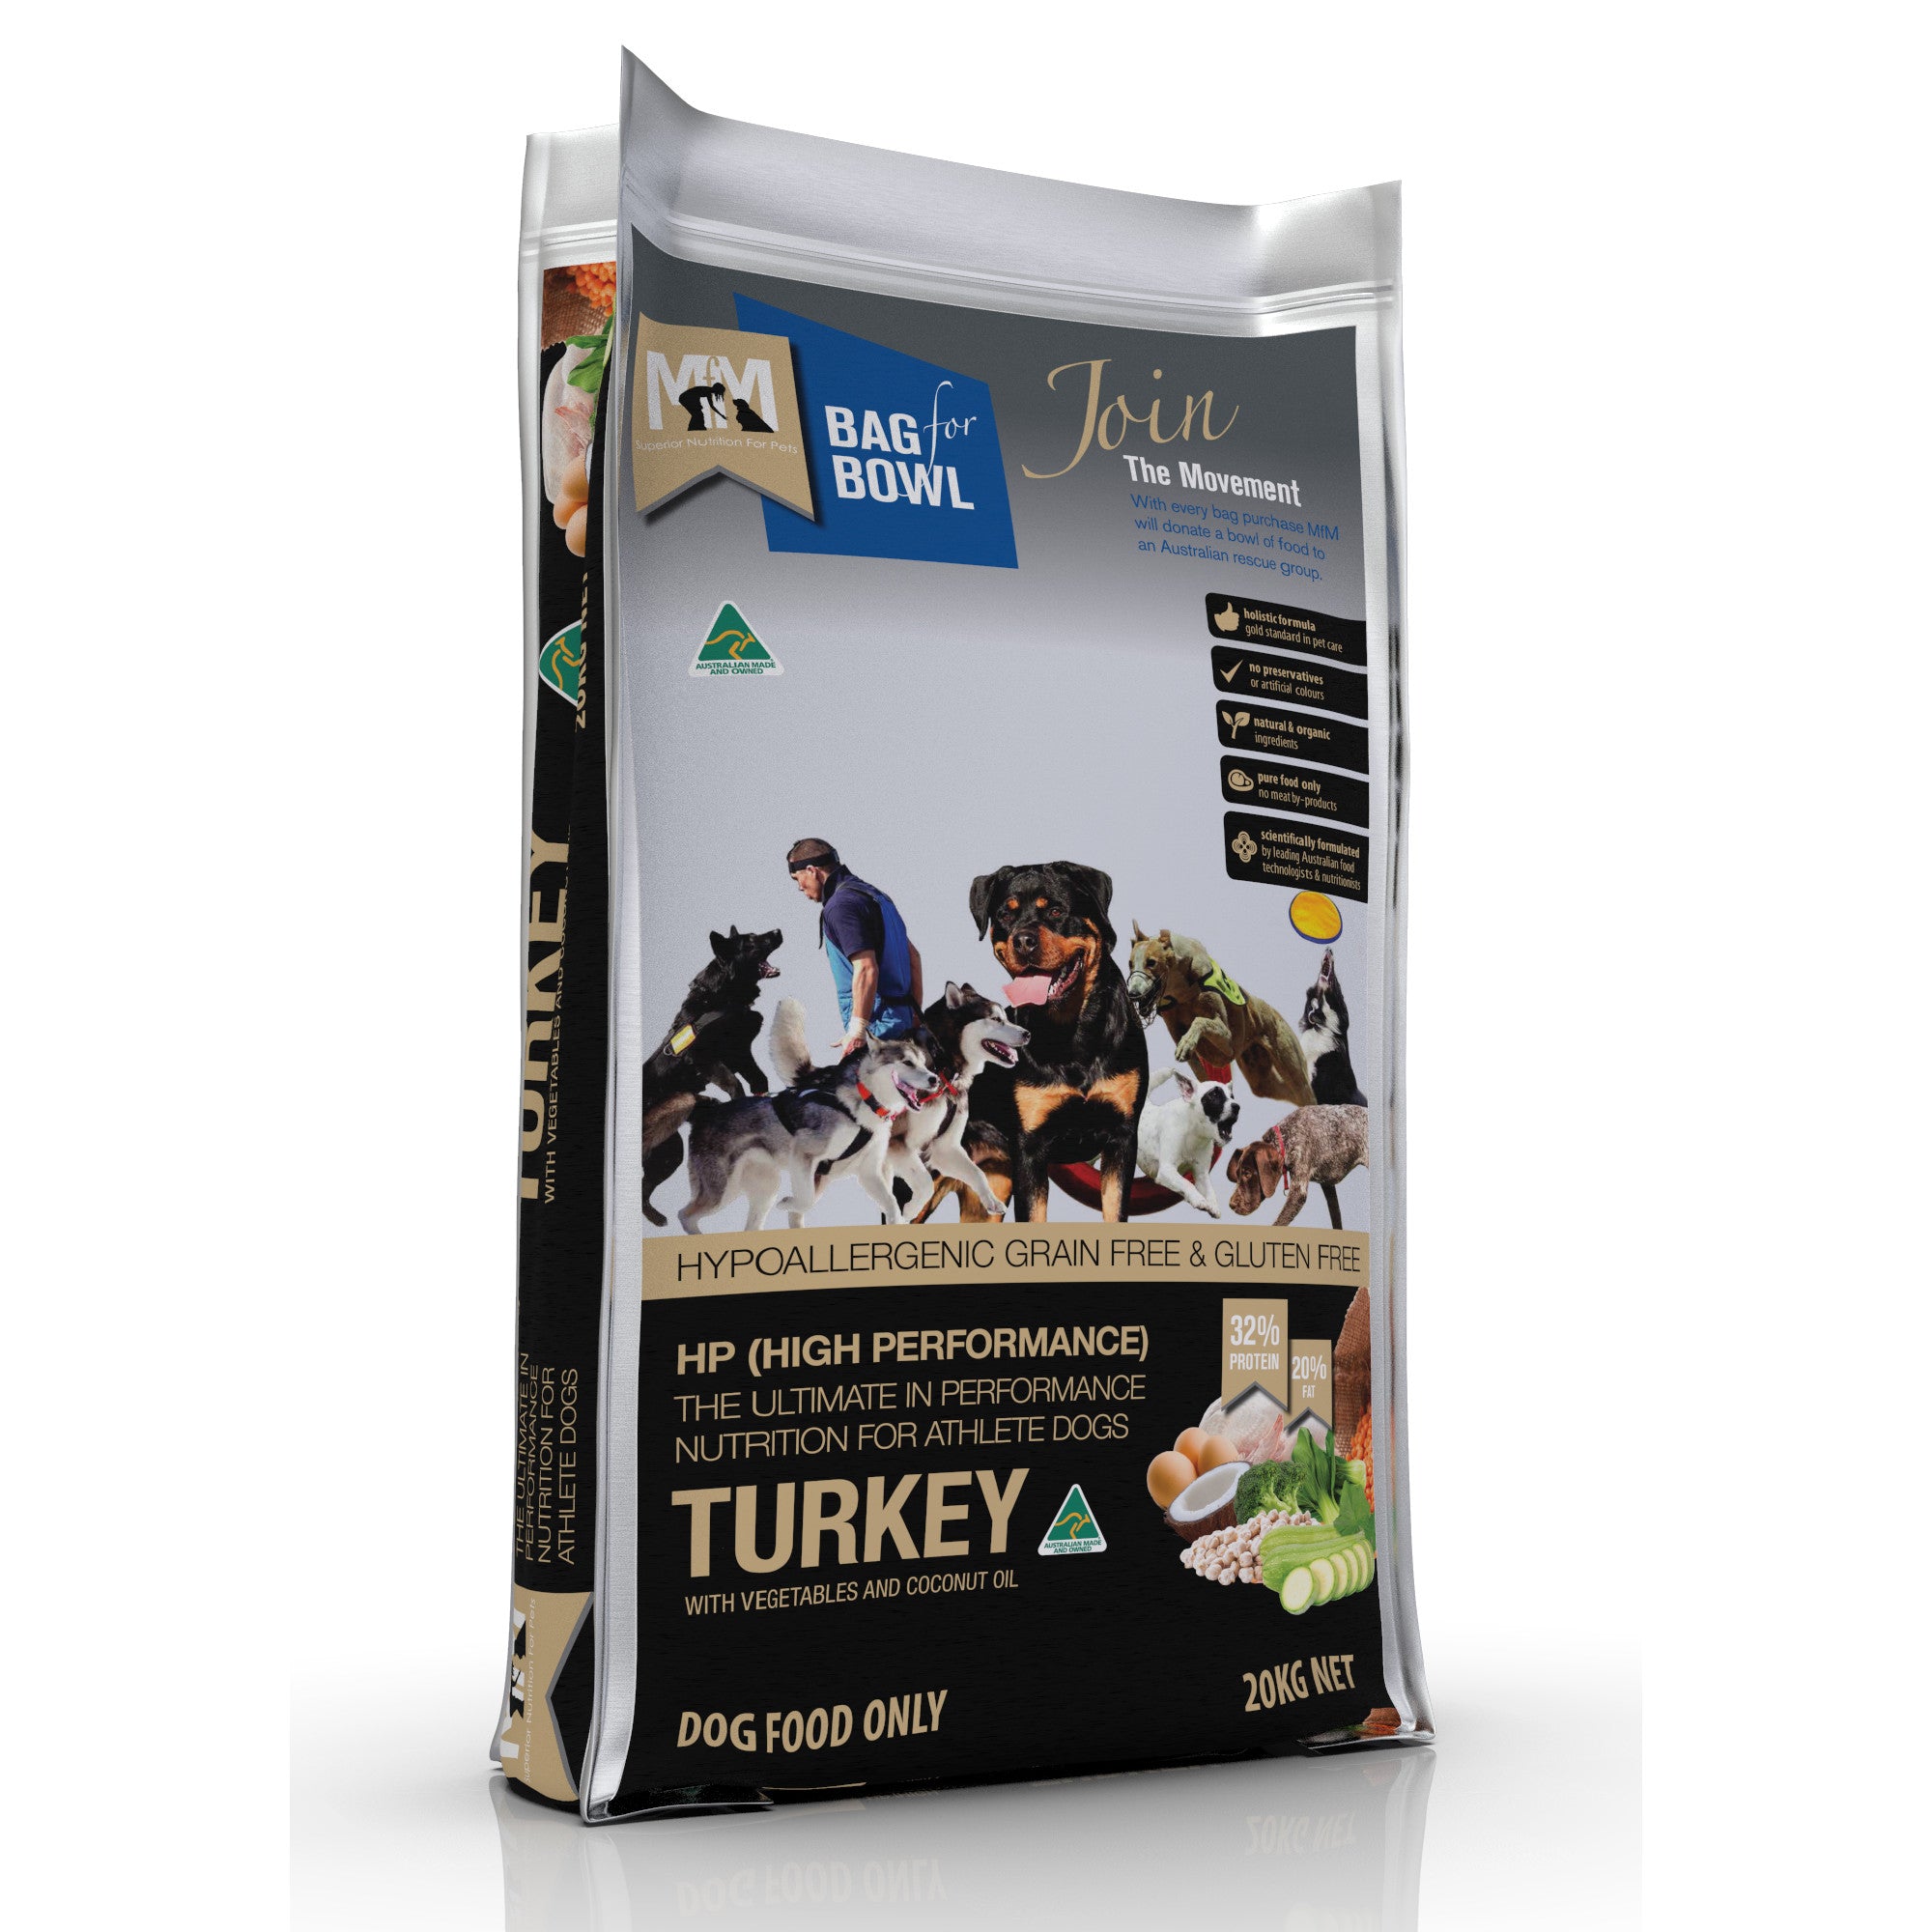 Meals for Mutts High Performance Turkey Dog Food 20kg.